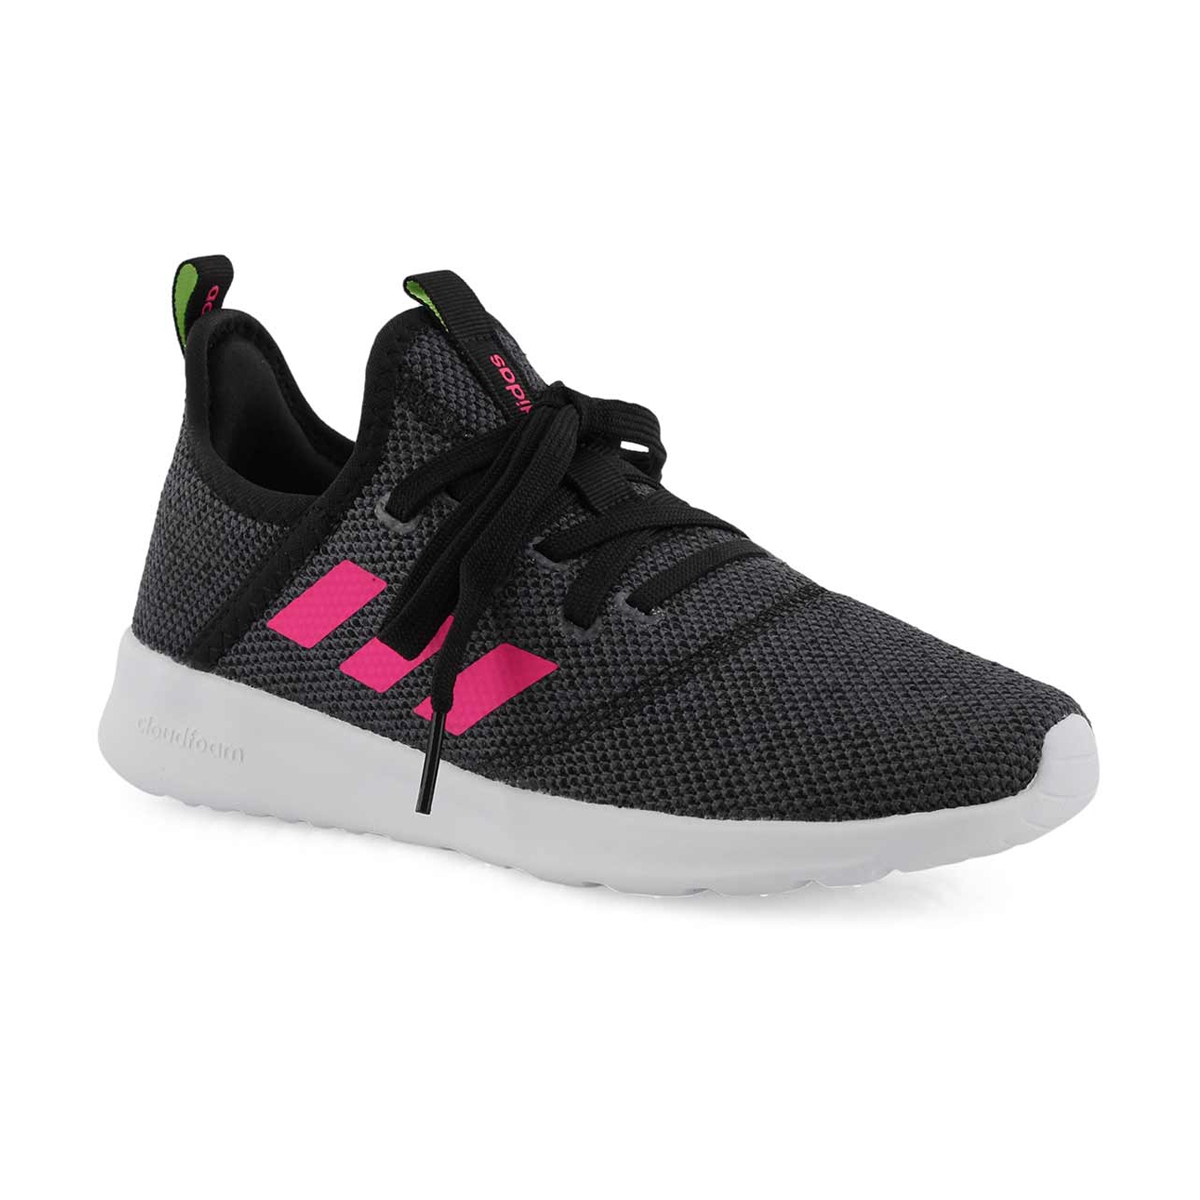 adidas cloudfoam pink and black